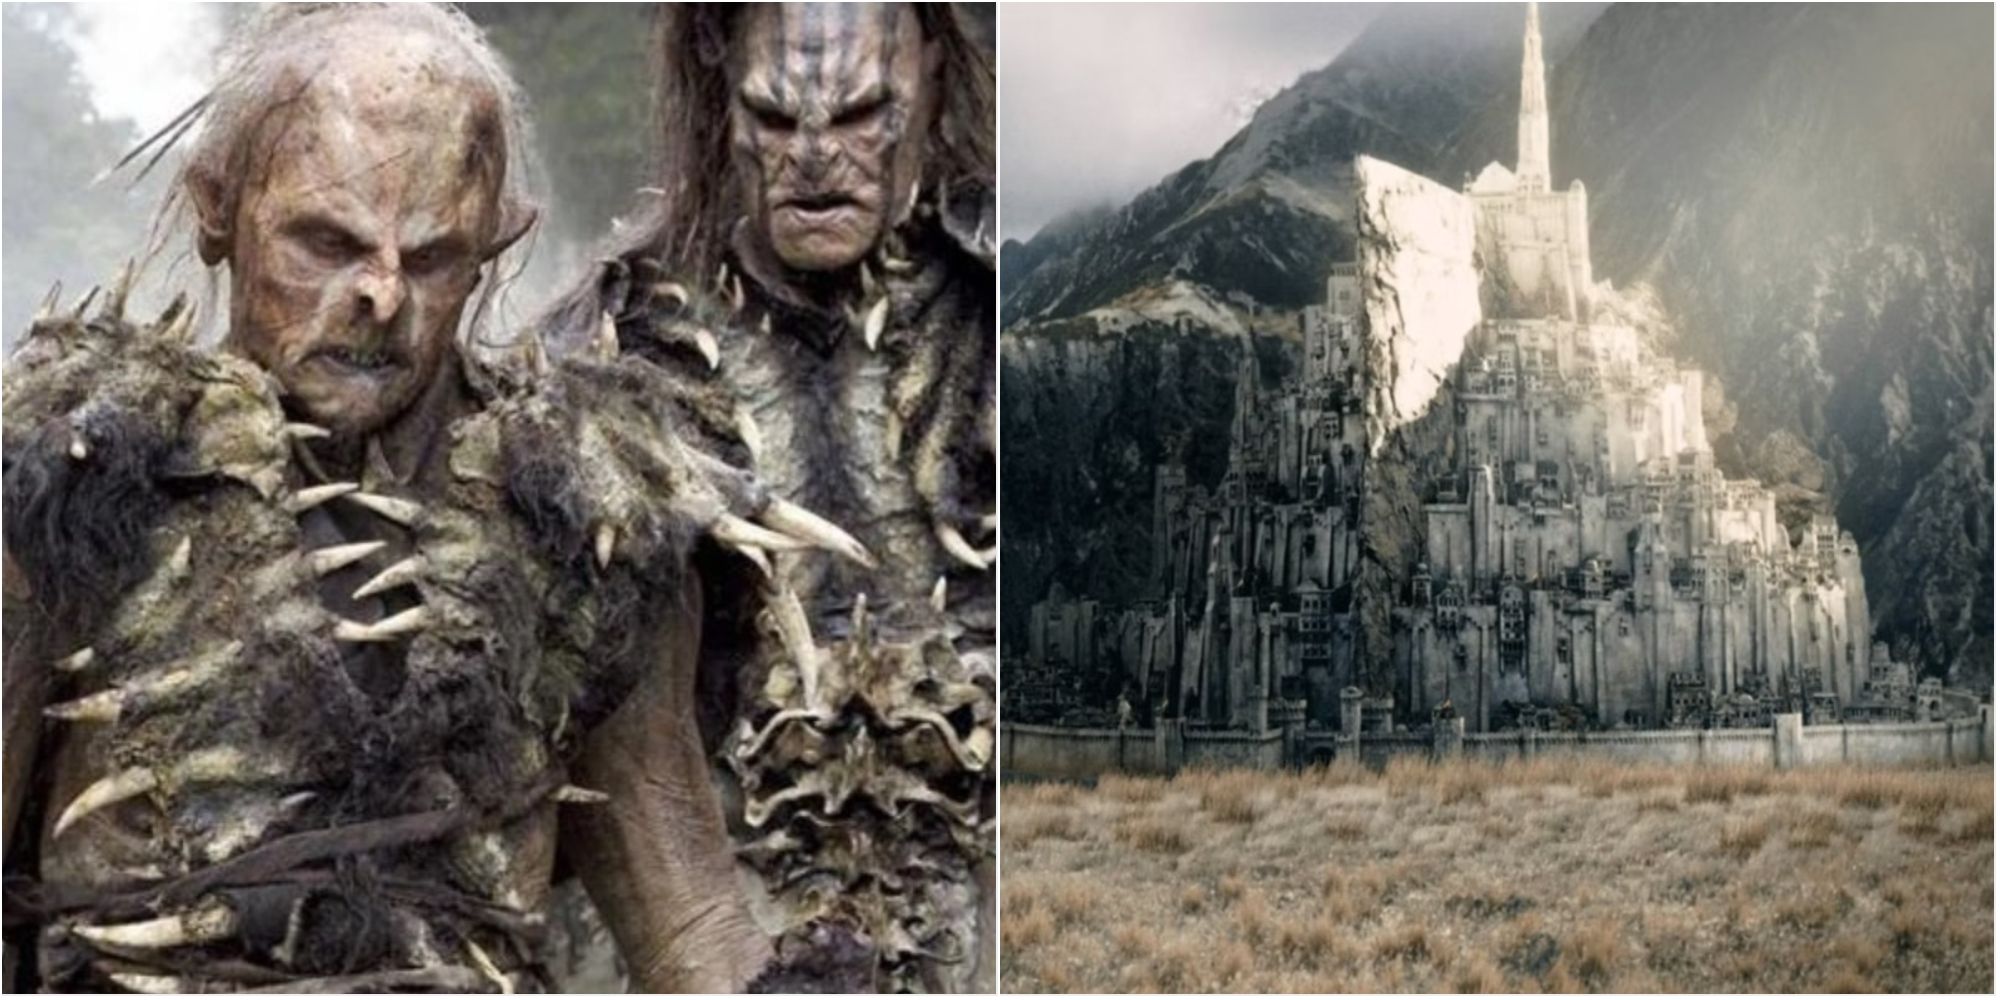 Orcs and Gondor in LOTR